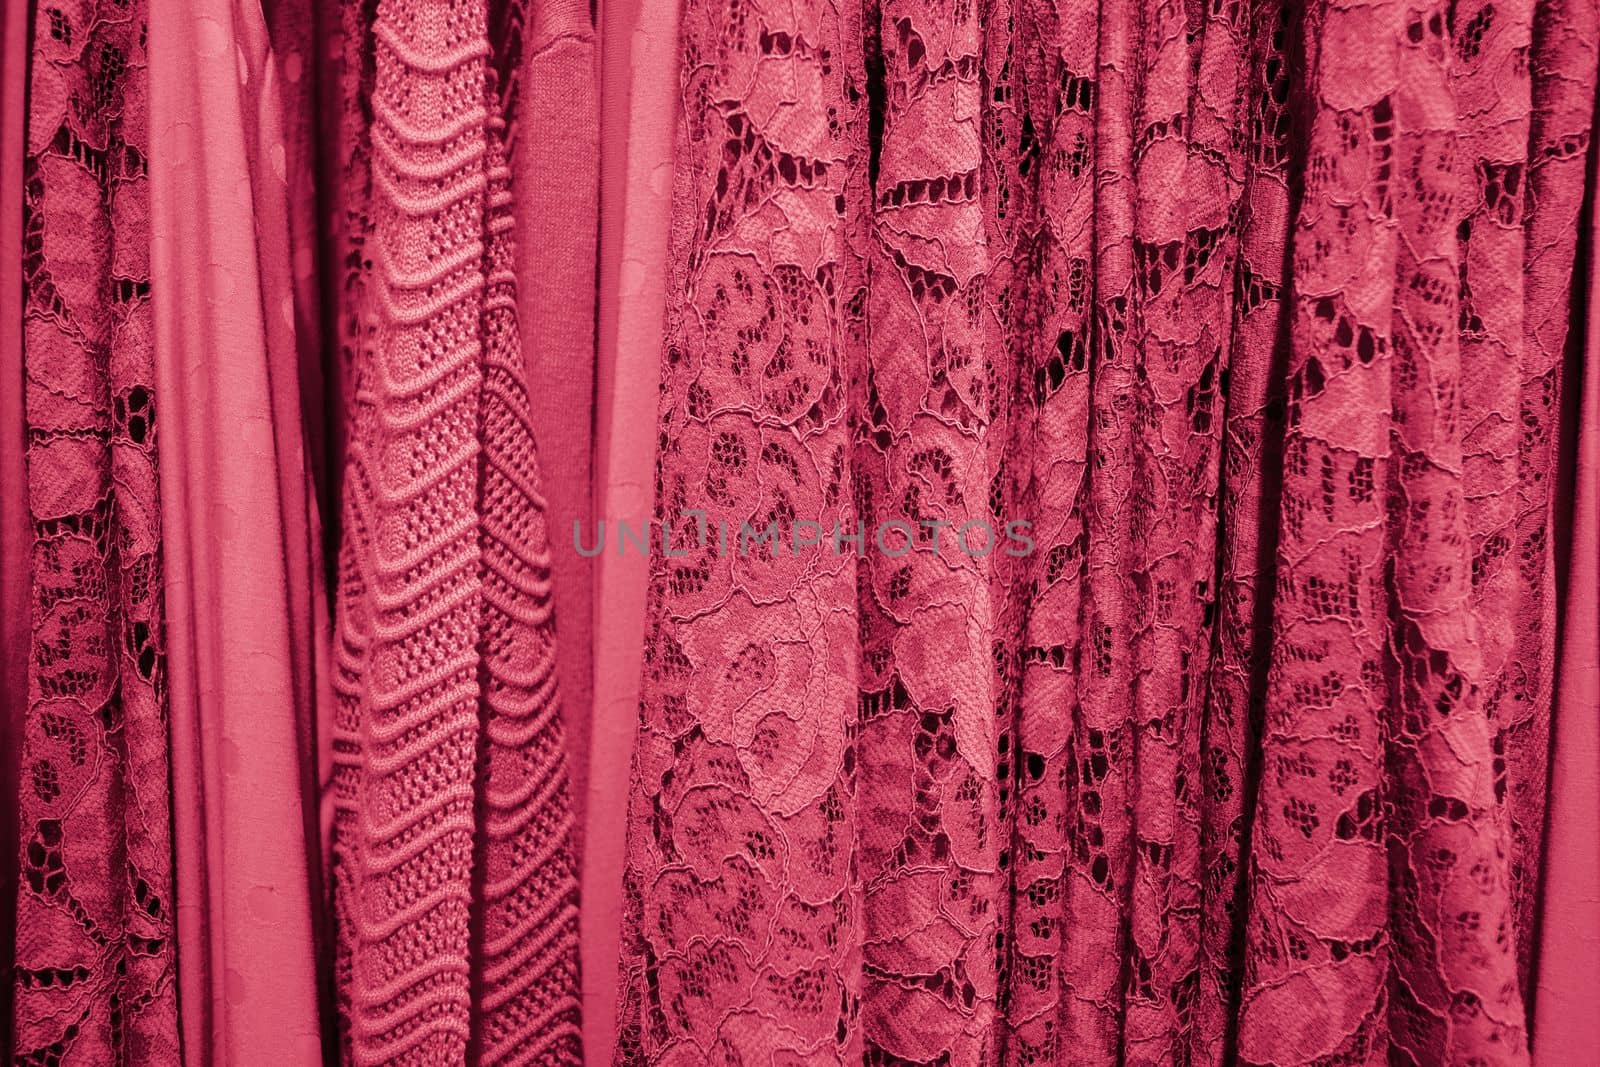 summer blouses on a hanger in the store, concept color of the year 2023 Viva Magenta, High quality photo